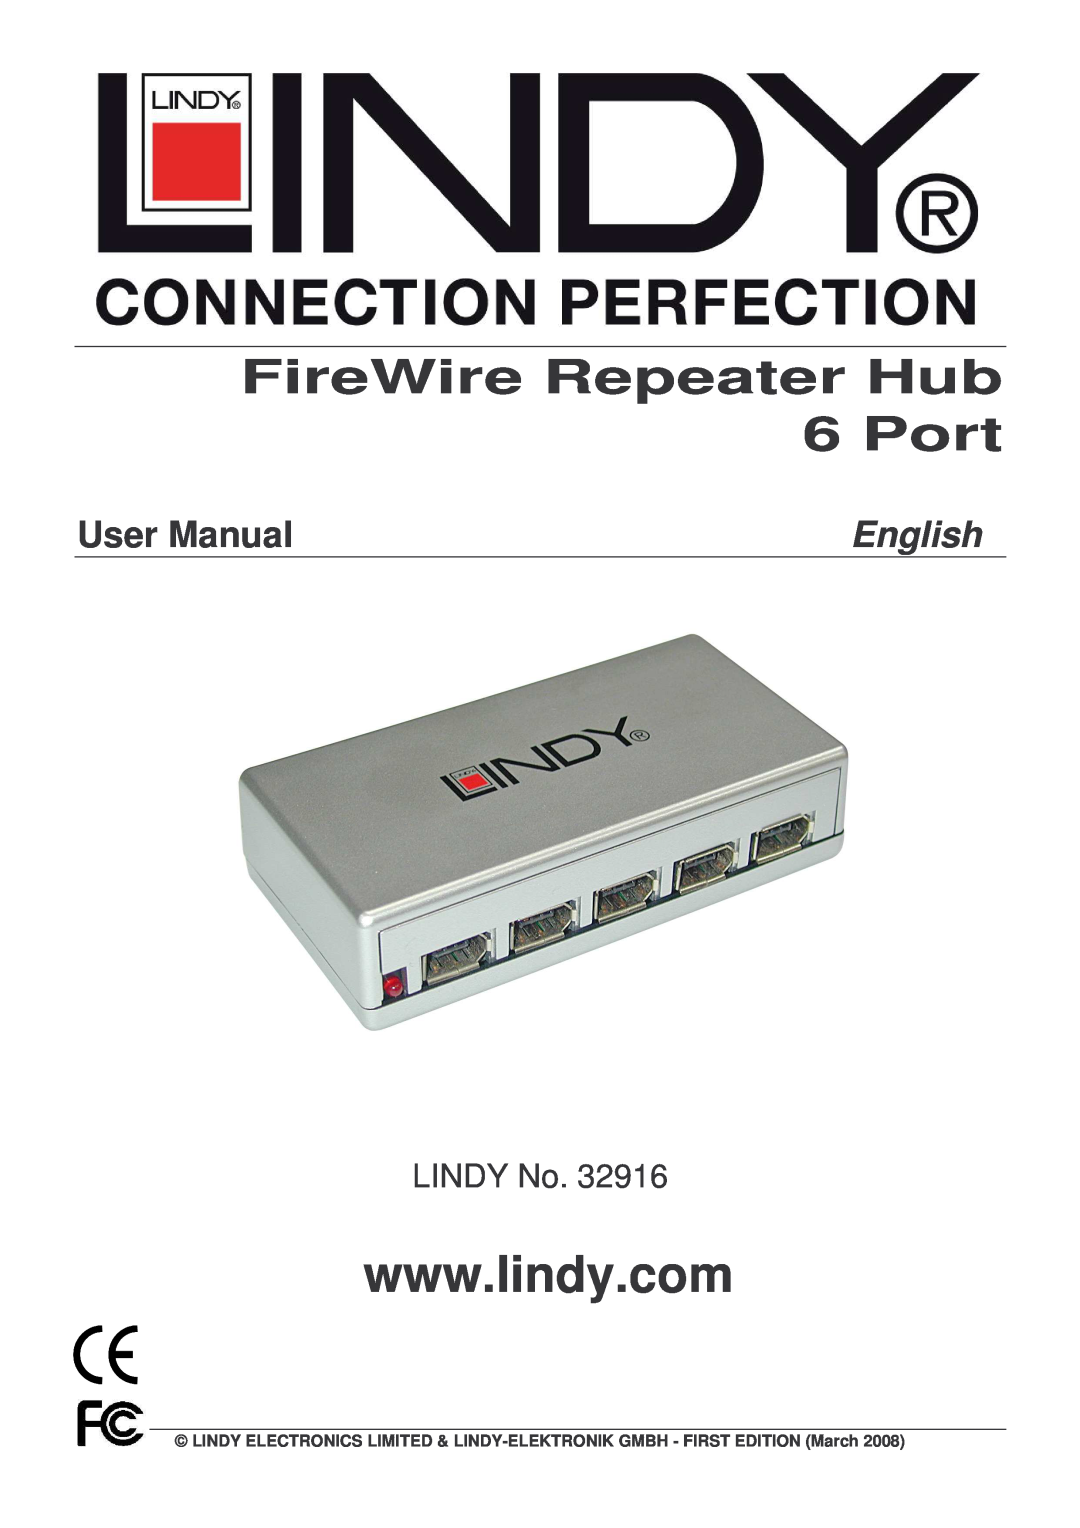 Lindy 32916 user manual FireWire Repeater Hub 6 Port, User Manual, English, LINDY No 